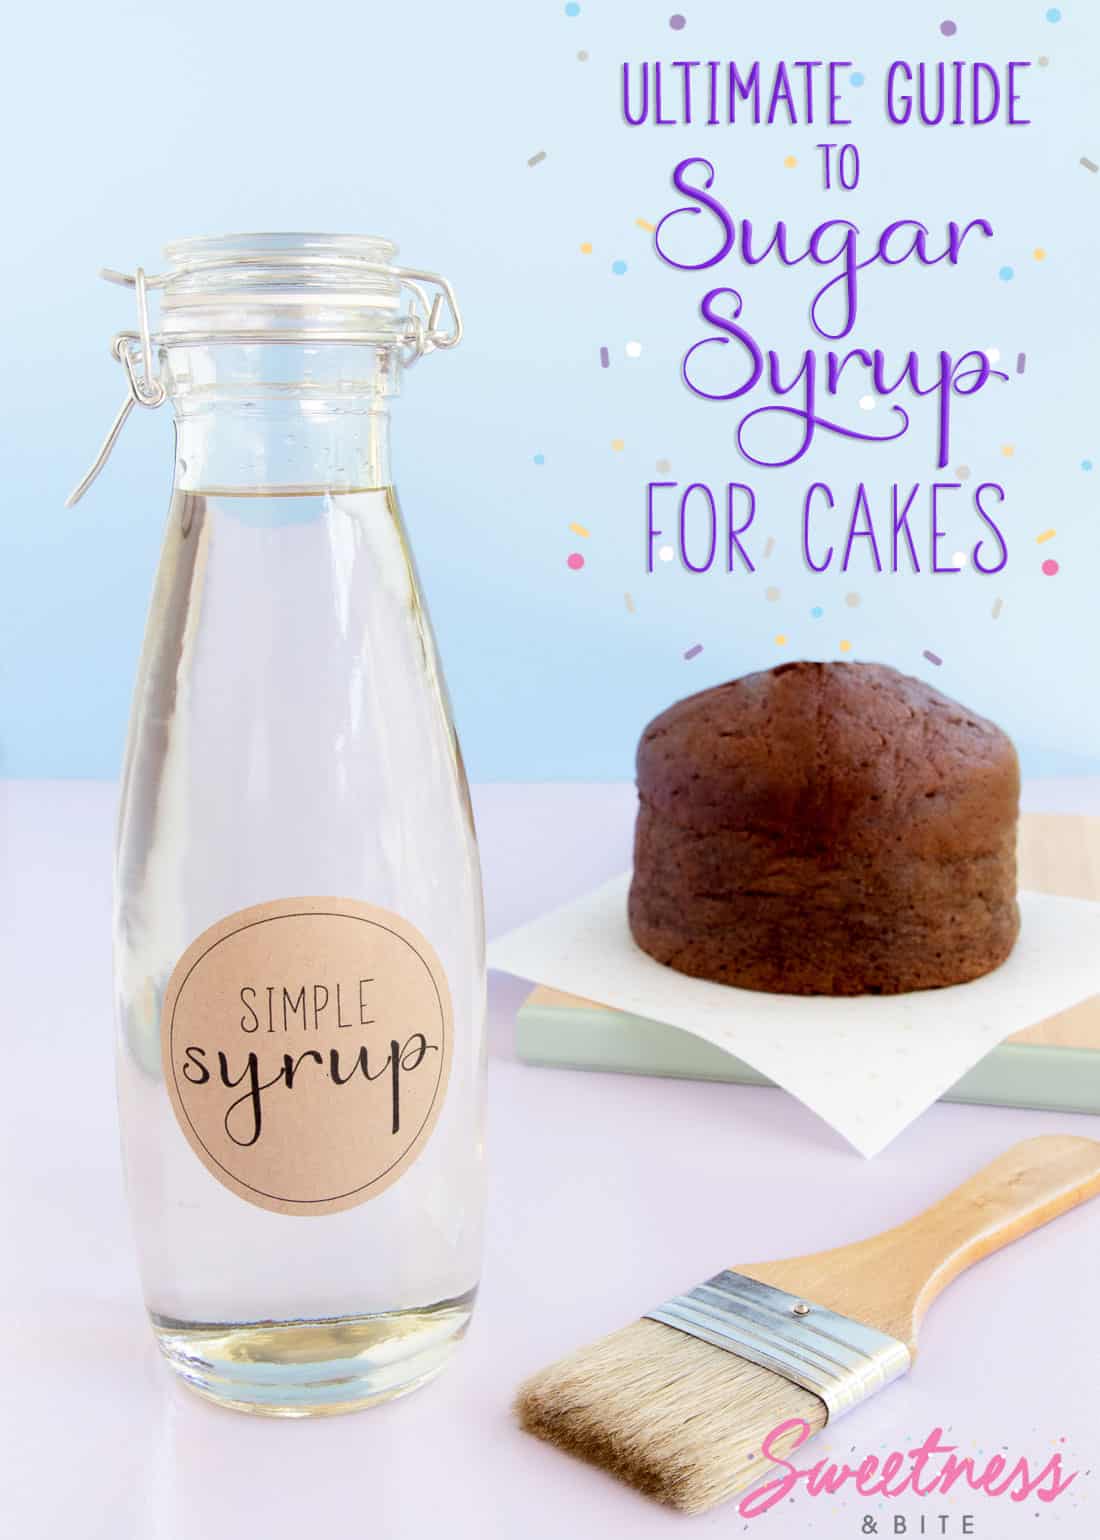 A bottle of simple syrup with a pastry brush and chocolate cake in the background, text overlay reads: "Ultimate Guide to Sugar Syrup for Cakes".